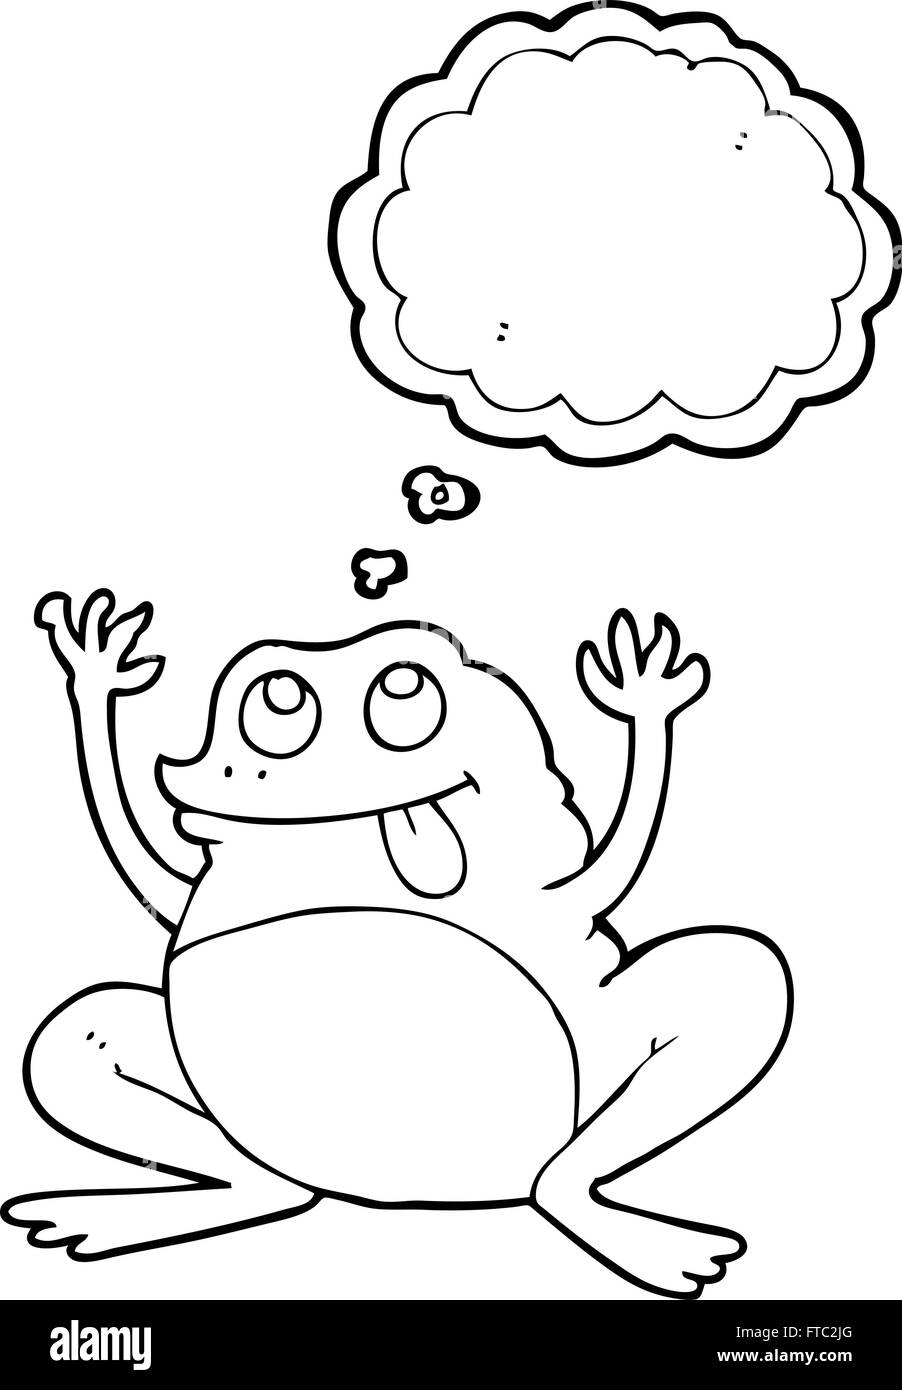 funny freehand drawn thought bubble cartoon frog Stock Vector